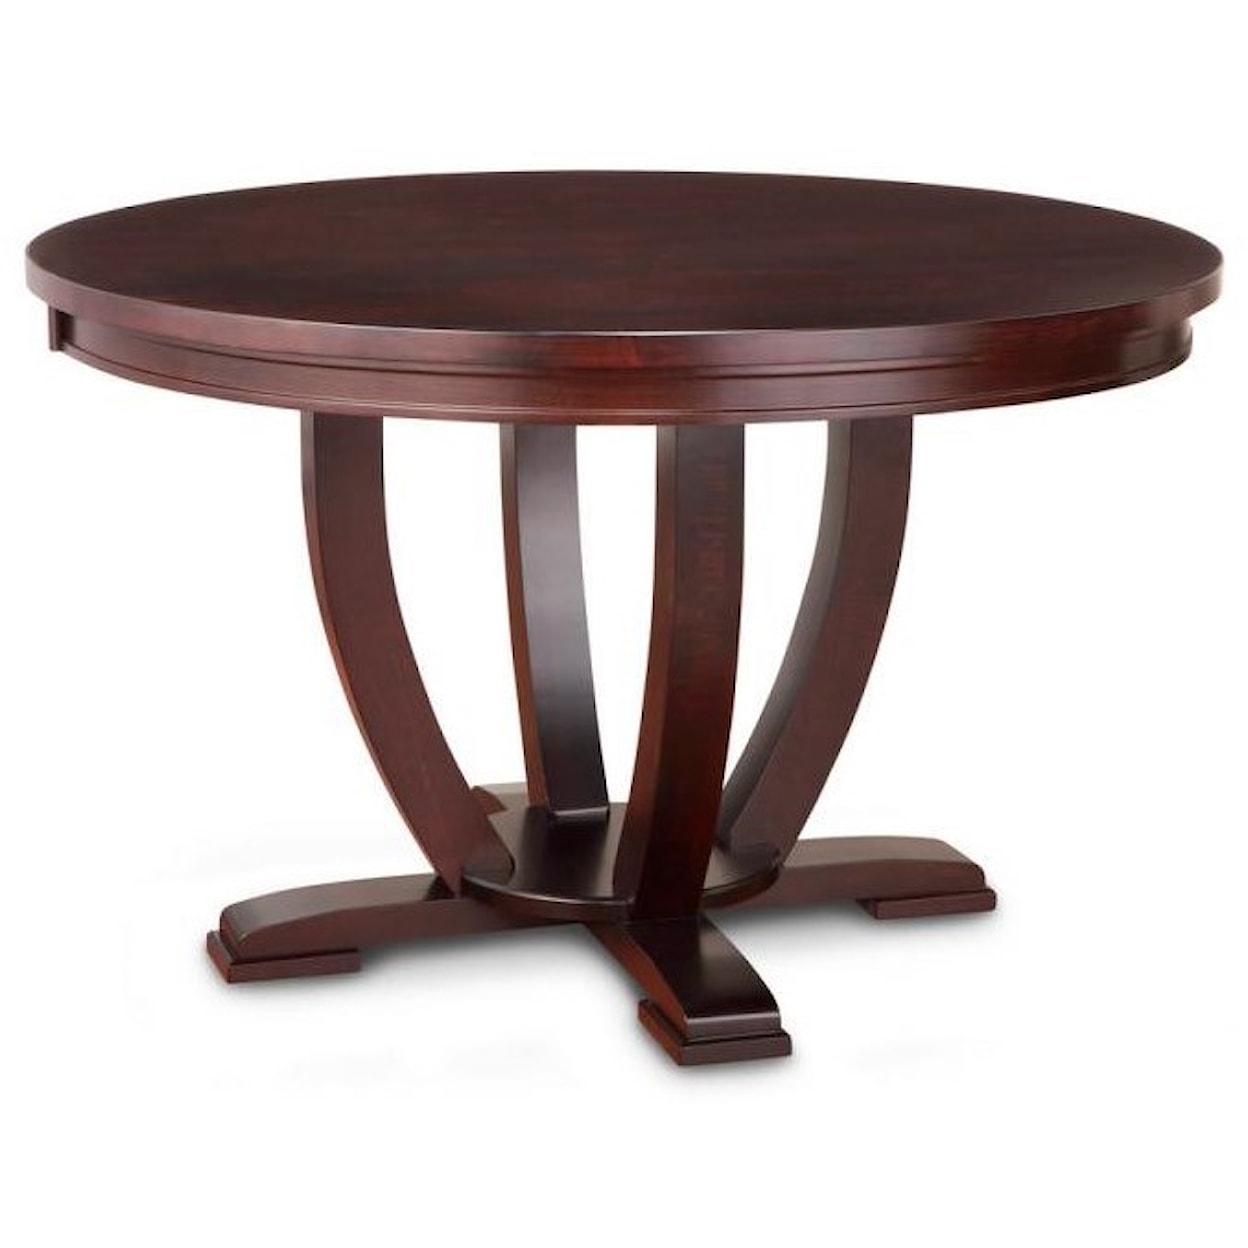 Handstone Florence 60" Round Dining Table